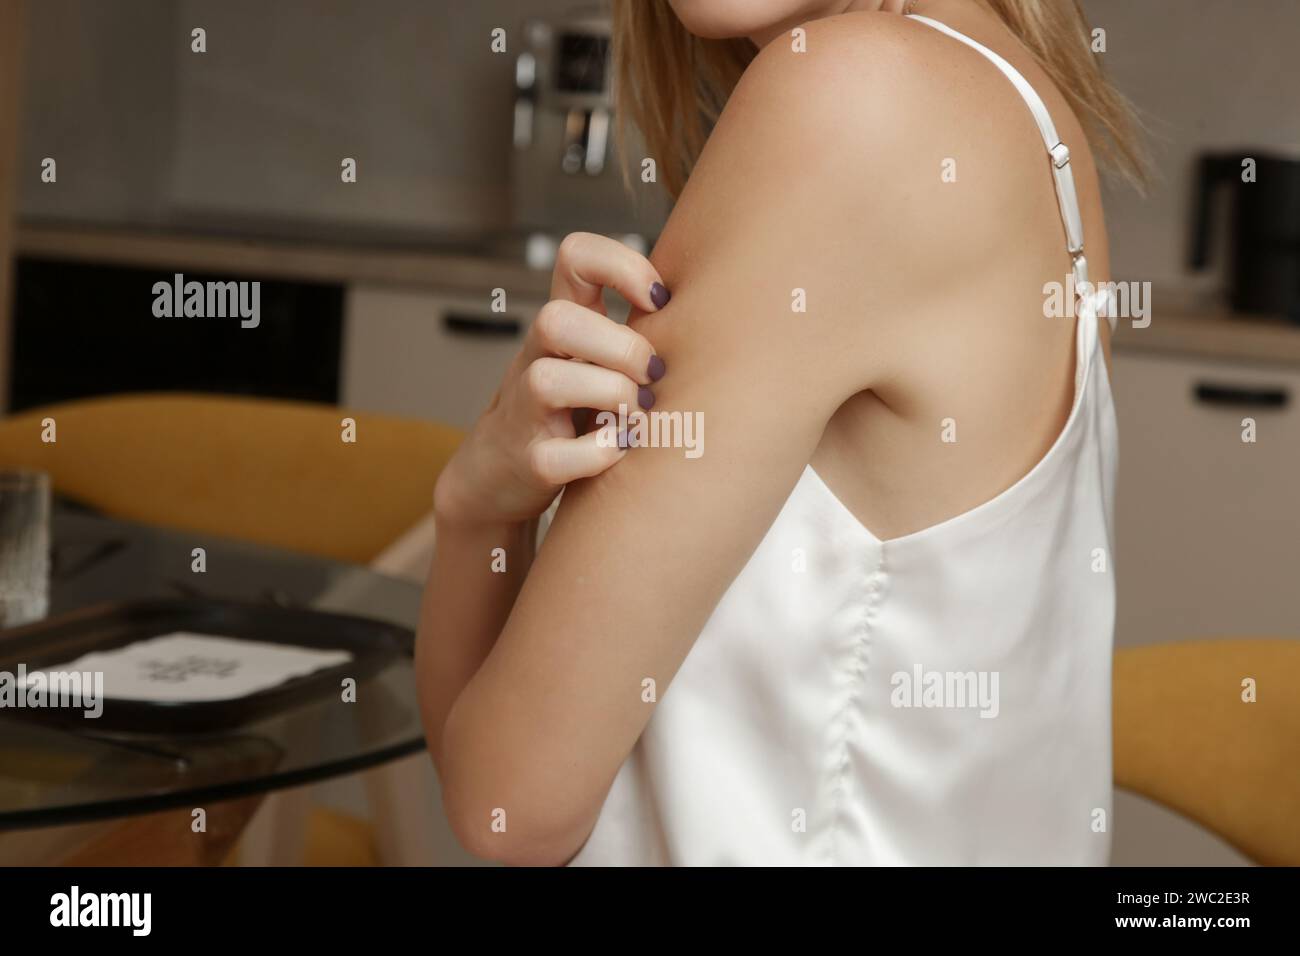 Woman scratching arm, suffering from skin allergy, rash, dermatitis or eczema. Stock Photo